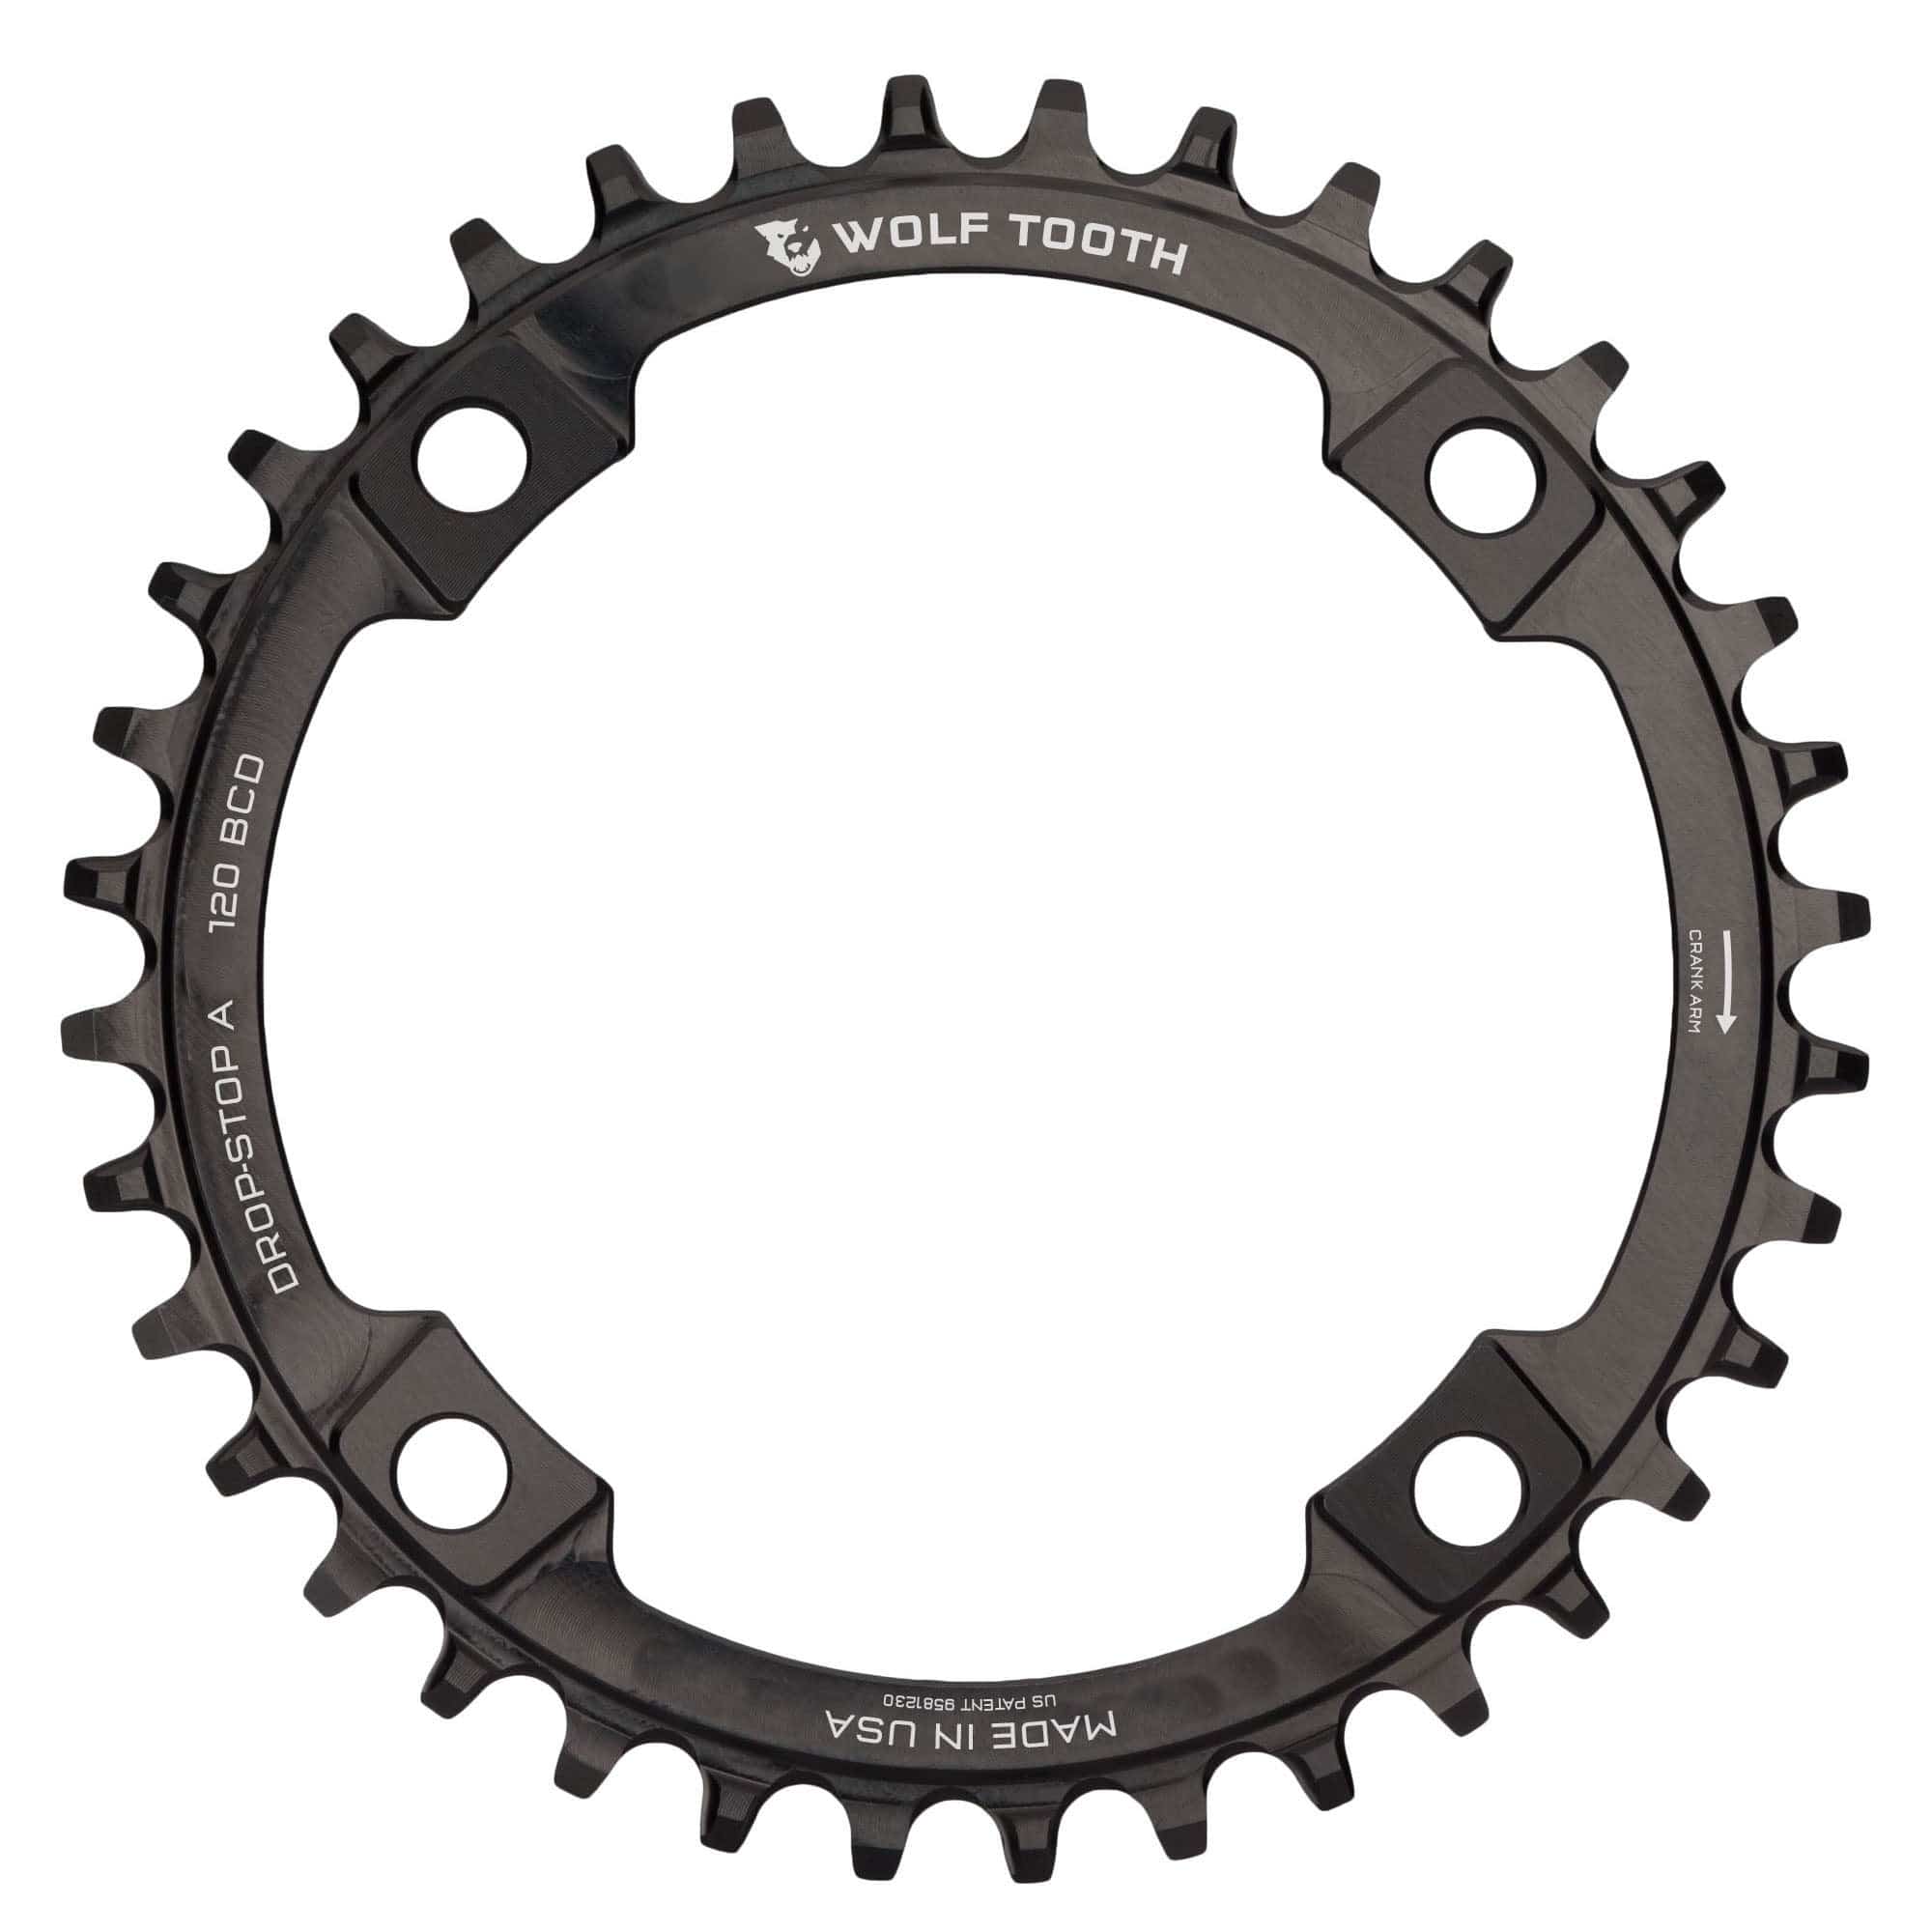 Drop-Stop A / 38T 120 BCD Chainrings